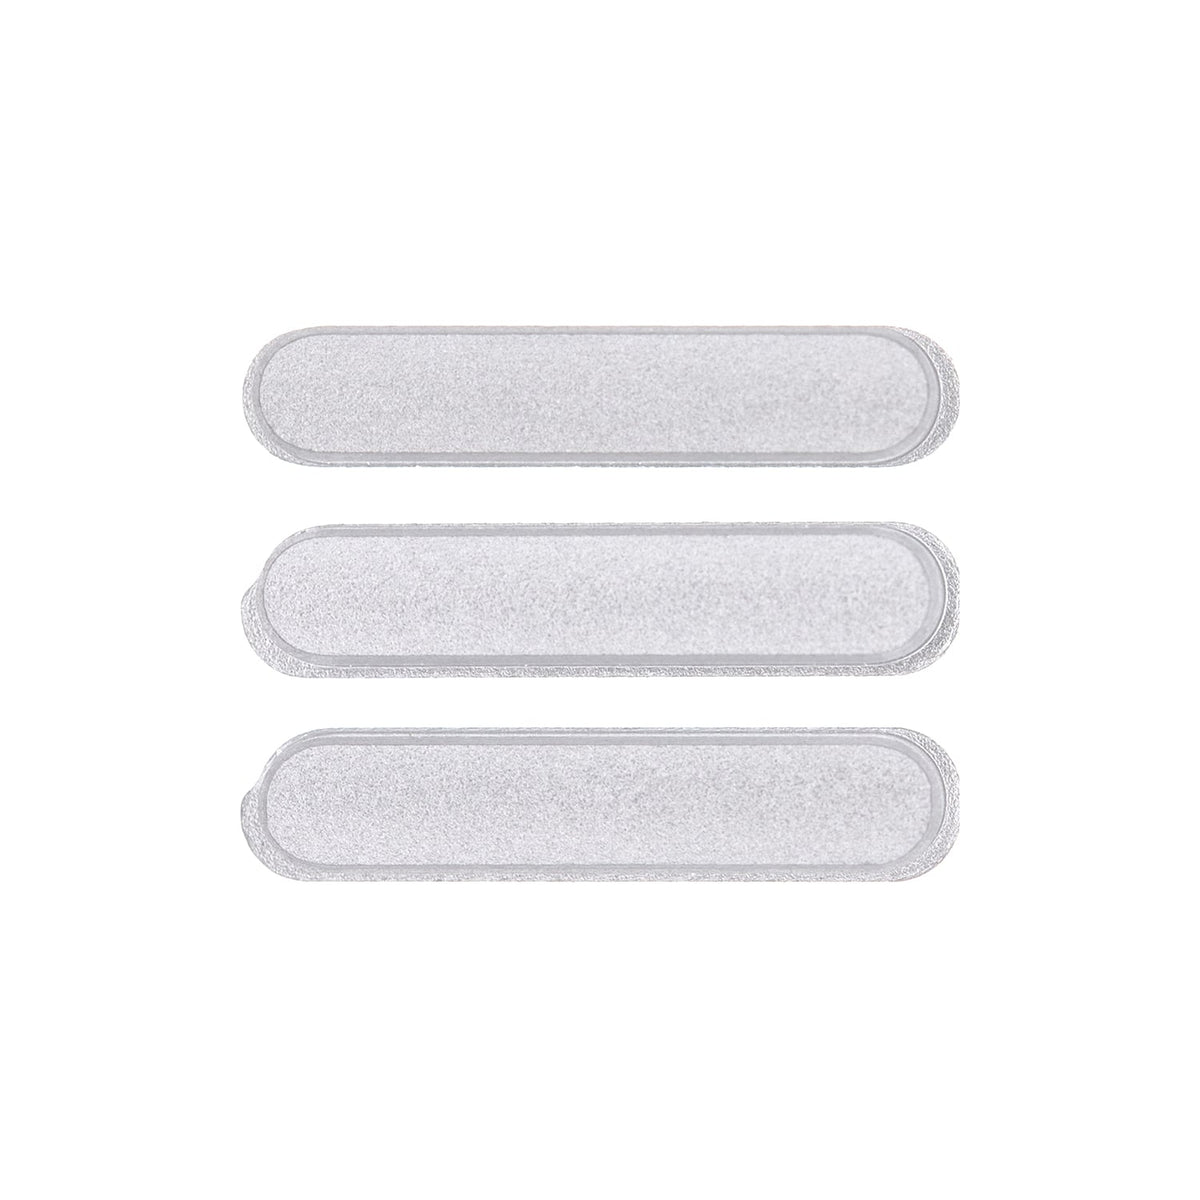 SIDE BUTTON SET FOR IPAD PRO 10.5/12.9 2ND/AIR 3 (3PCS/SET) - SILVER